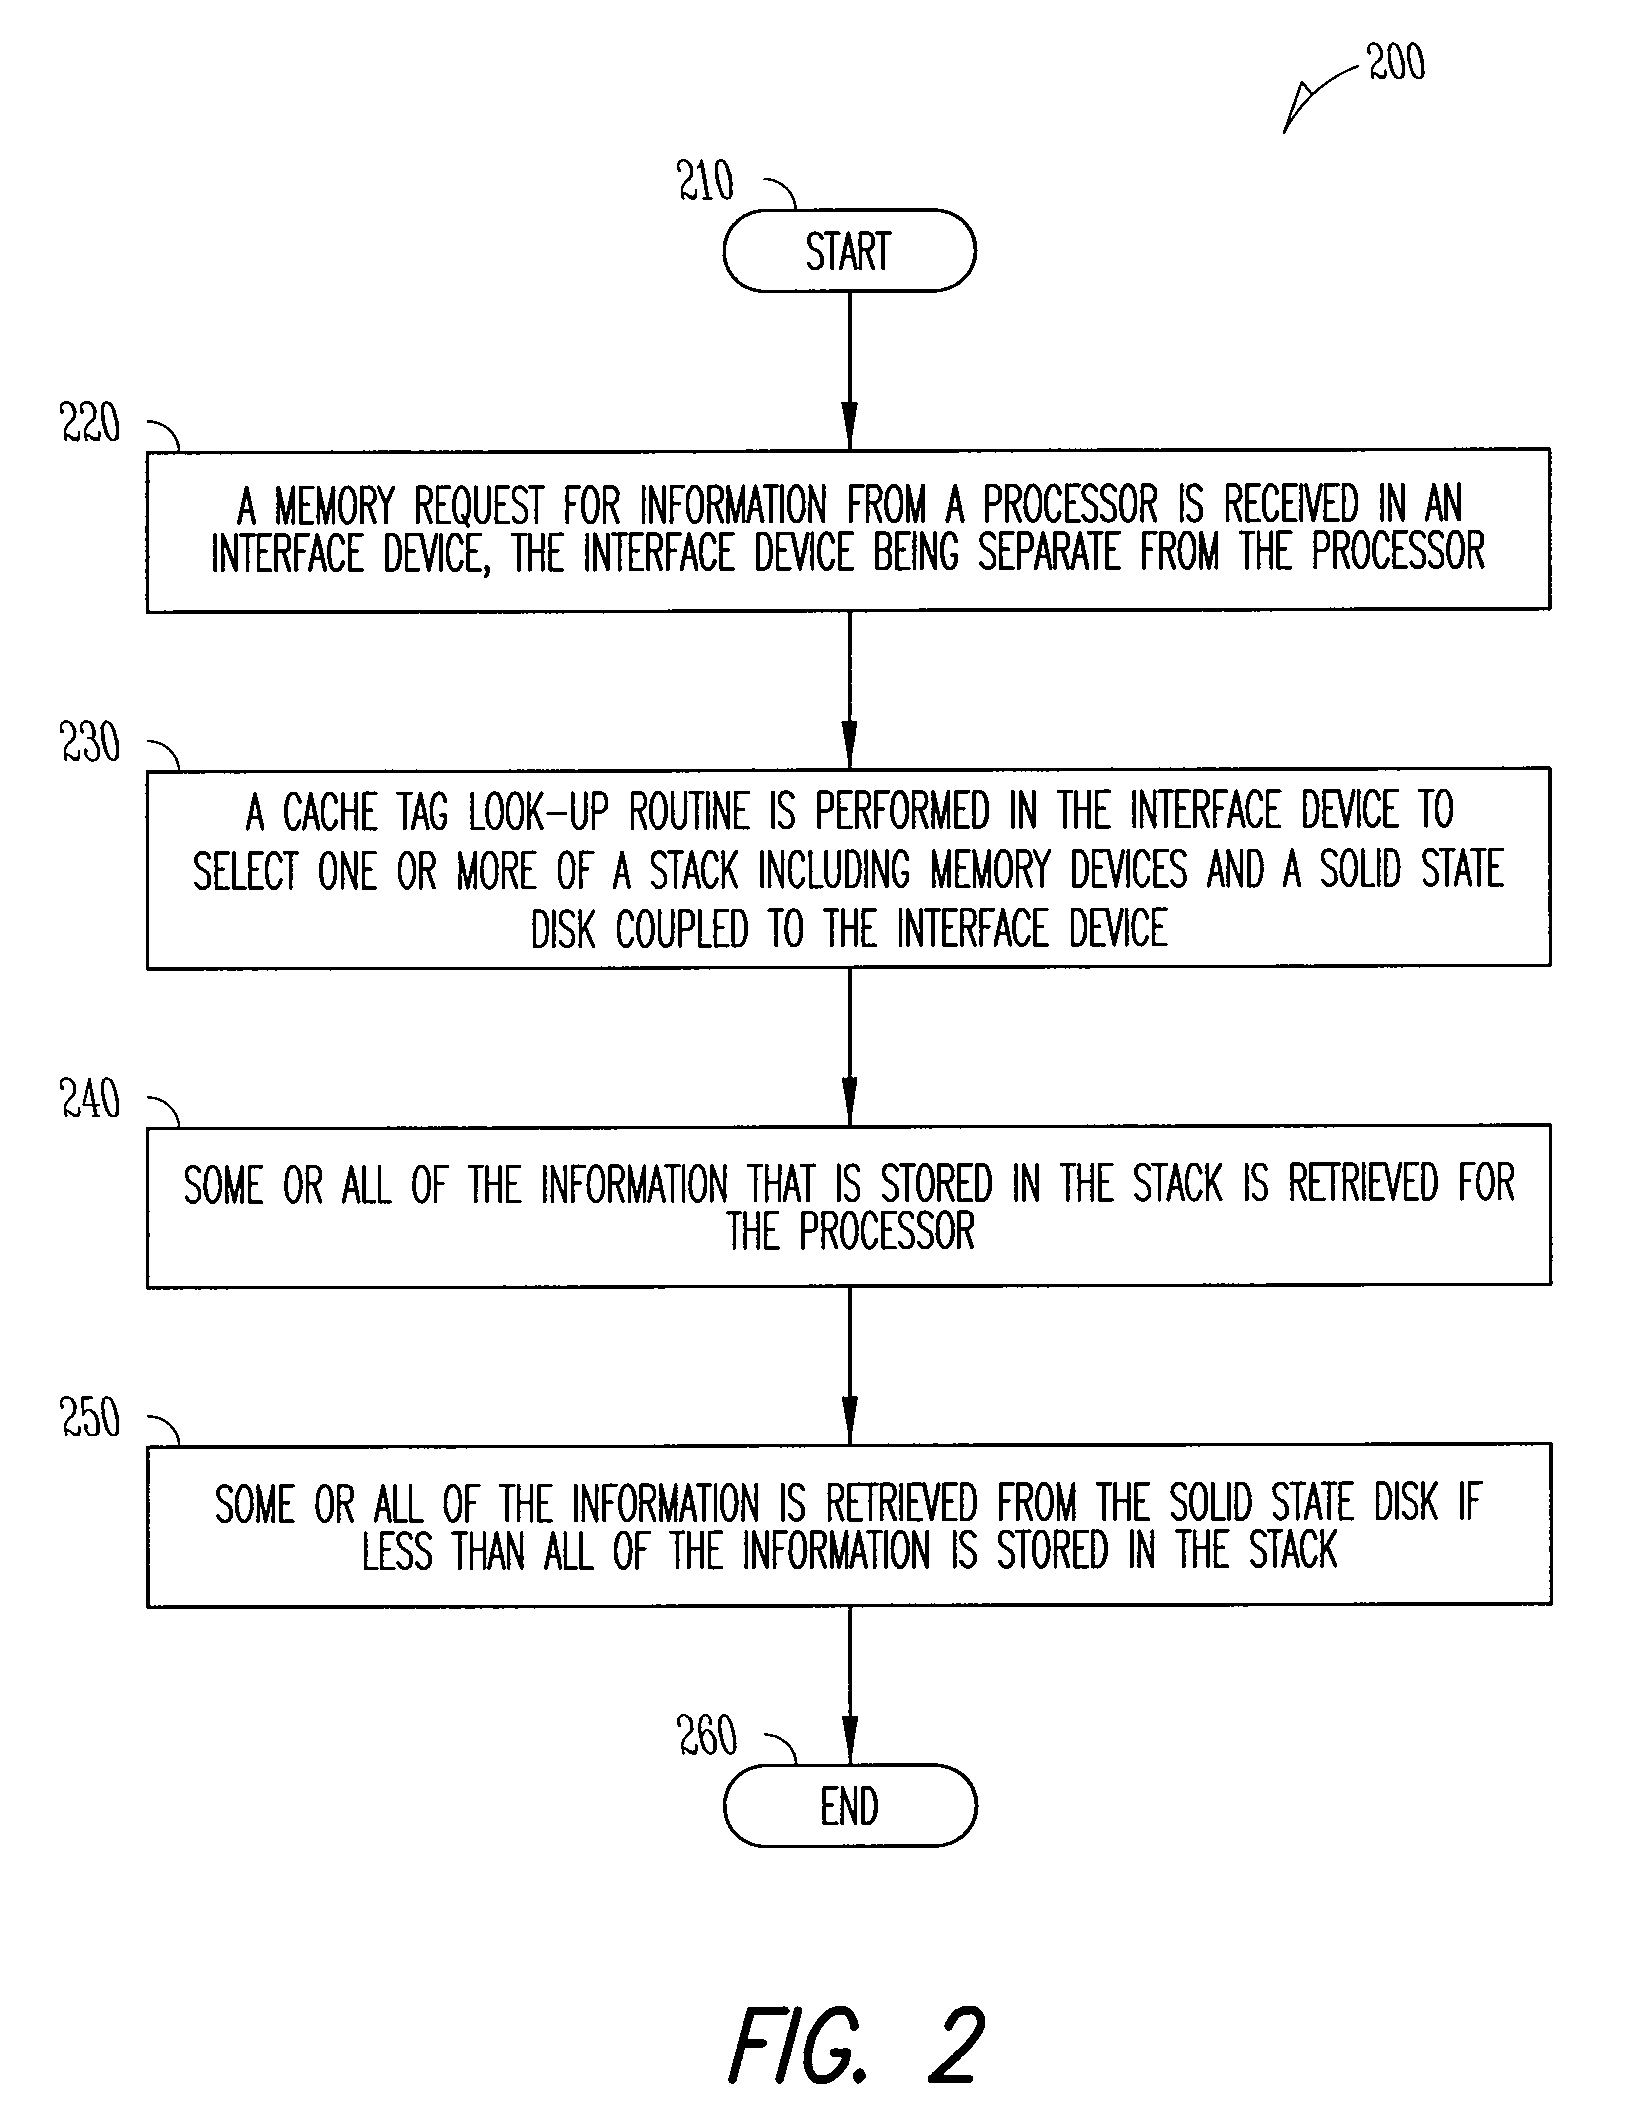 Interface device for memory in a stack, storage devices and a processor